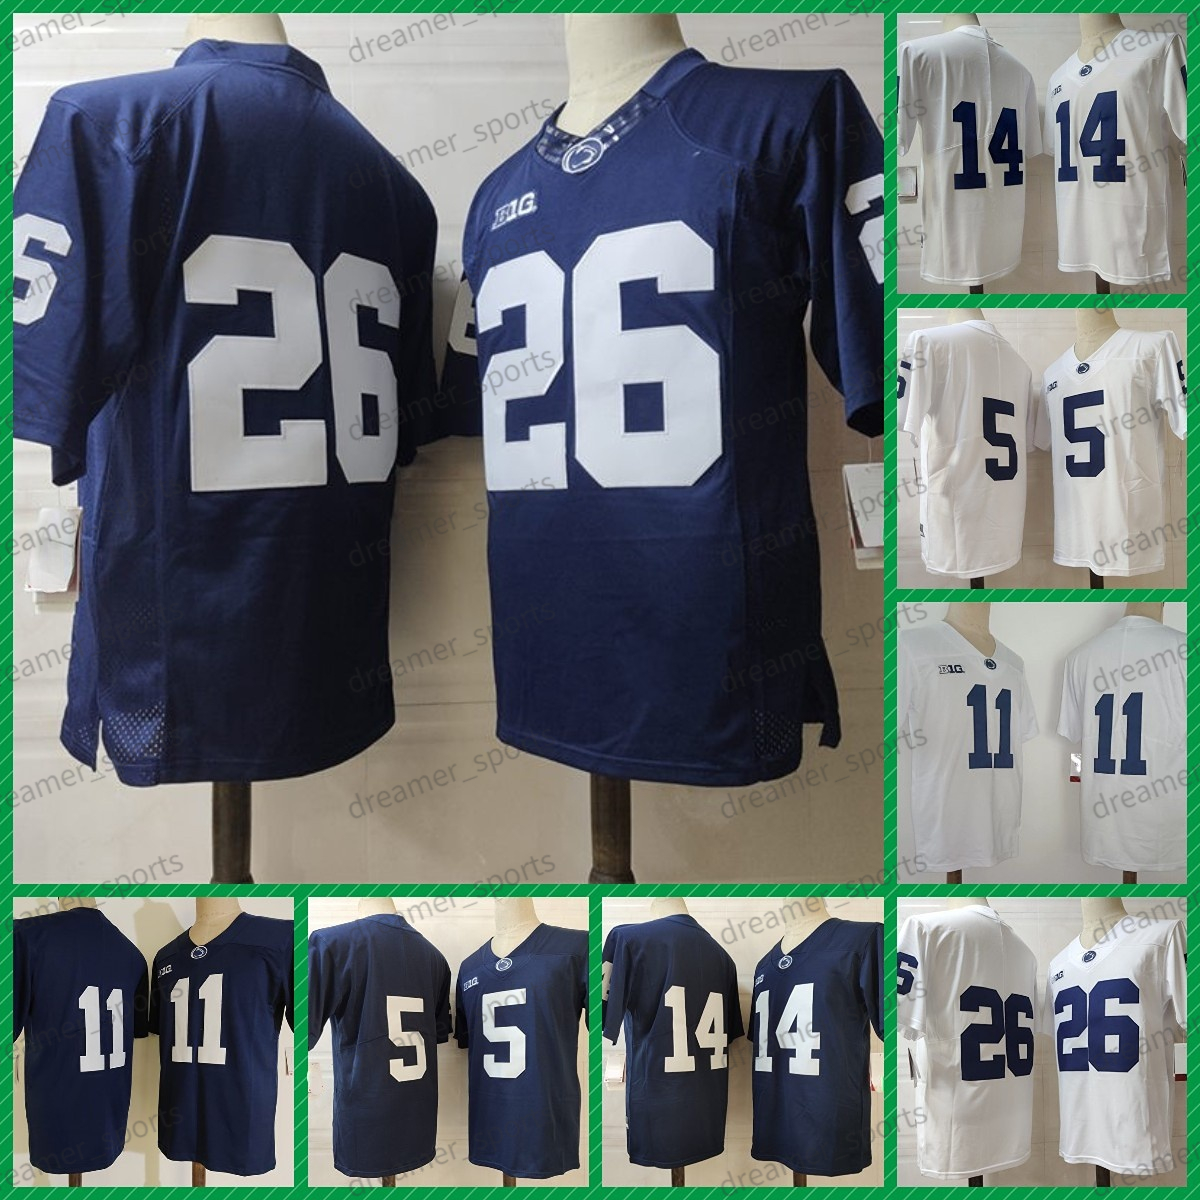 

NCAA 5 Dotson Football Jersey 11 Micah Parsons 14 Clifford 26 Saquon Barkley White Blue NO NAME Penn State College Football Jerseys Mens Stitched, White jersey;no name